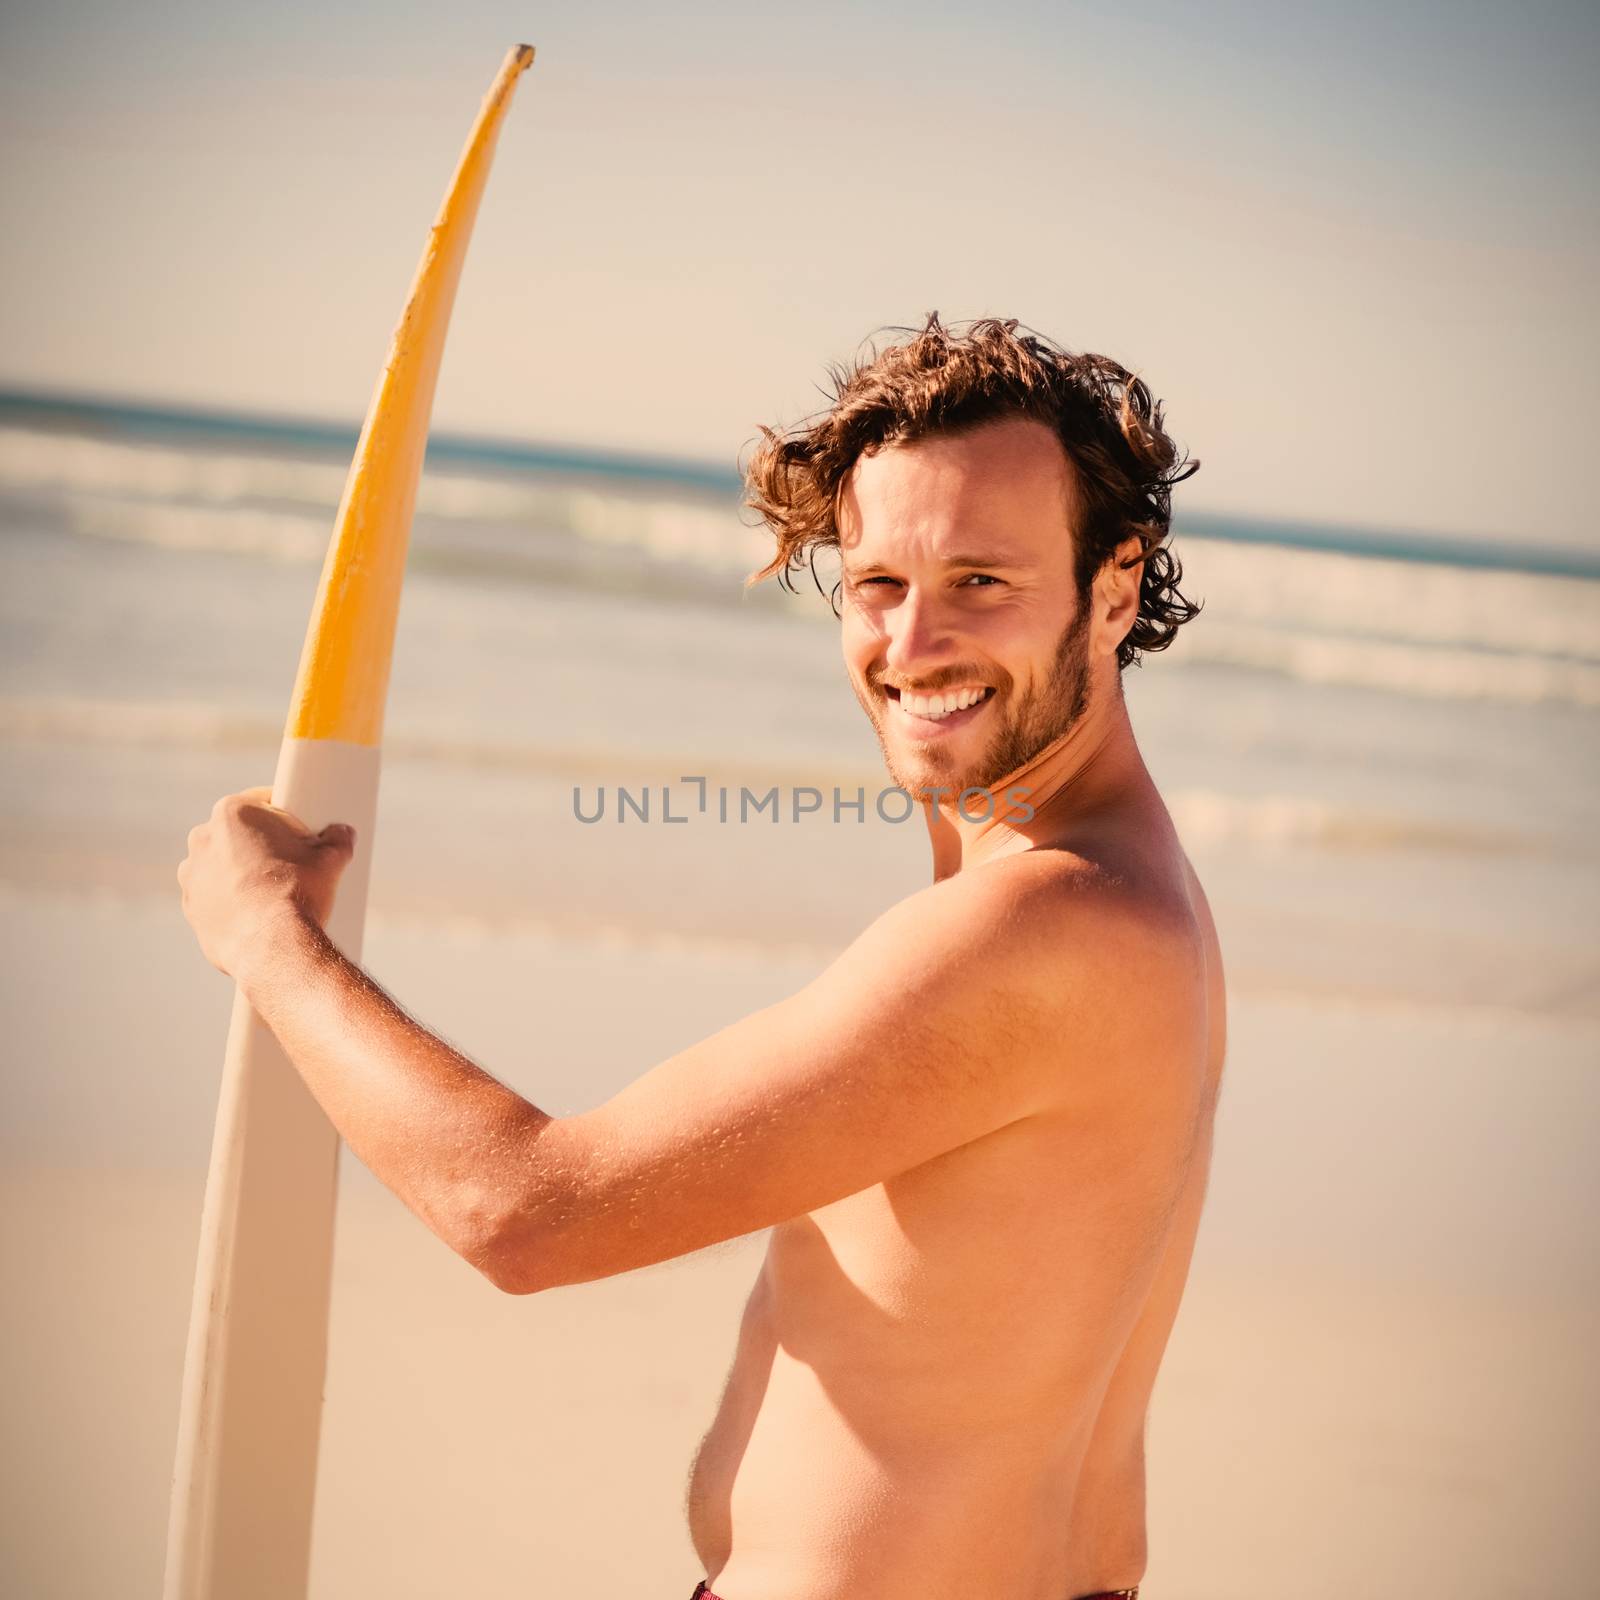 Portrait of happy shirtless man holding surfboard at beach during sunny day